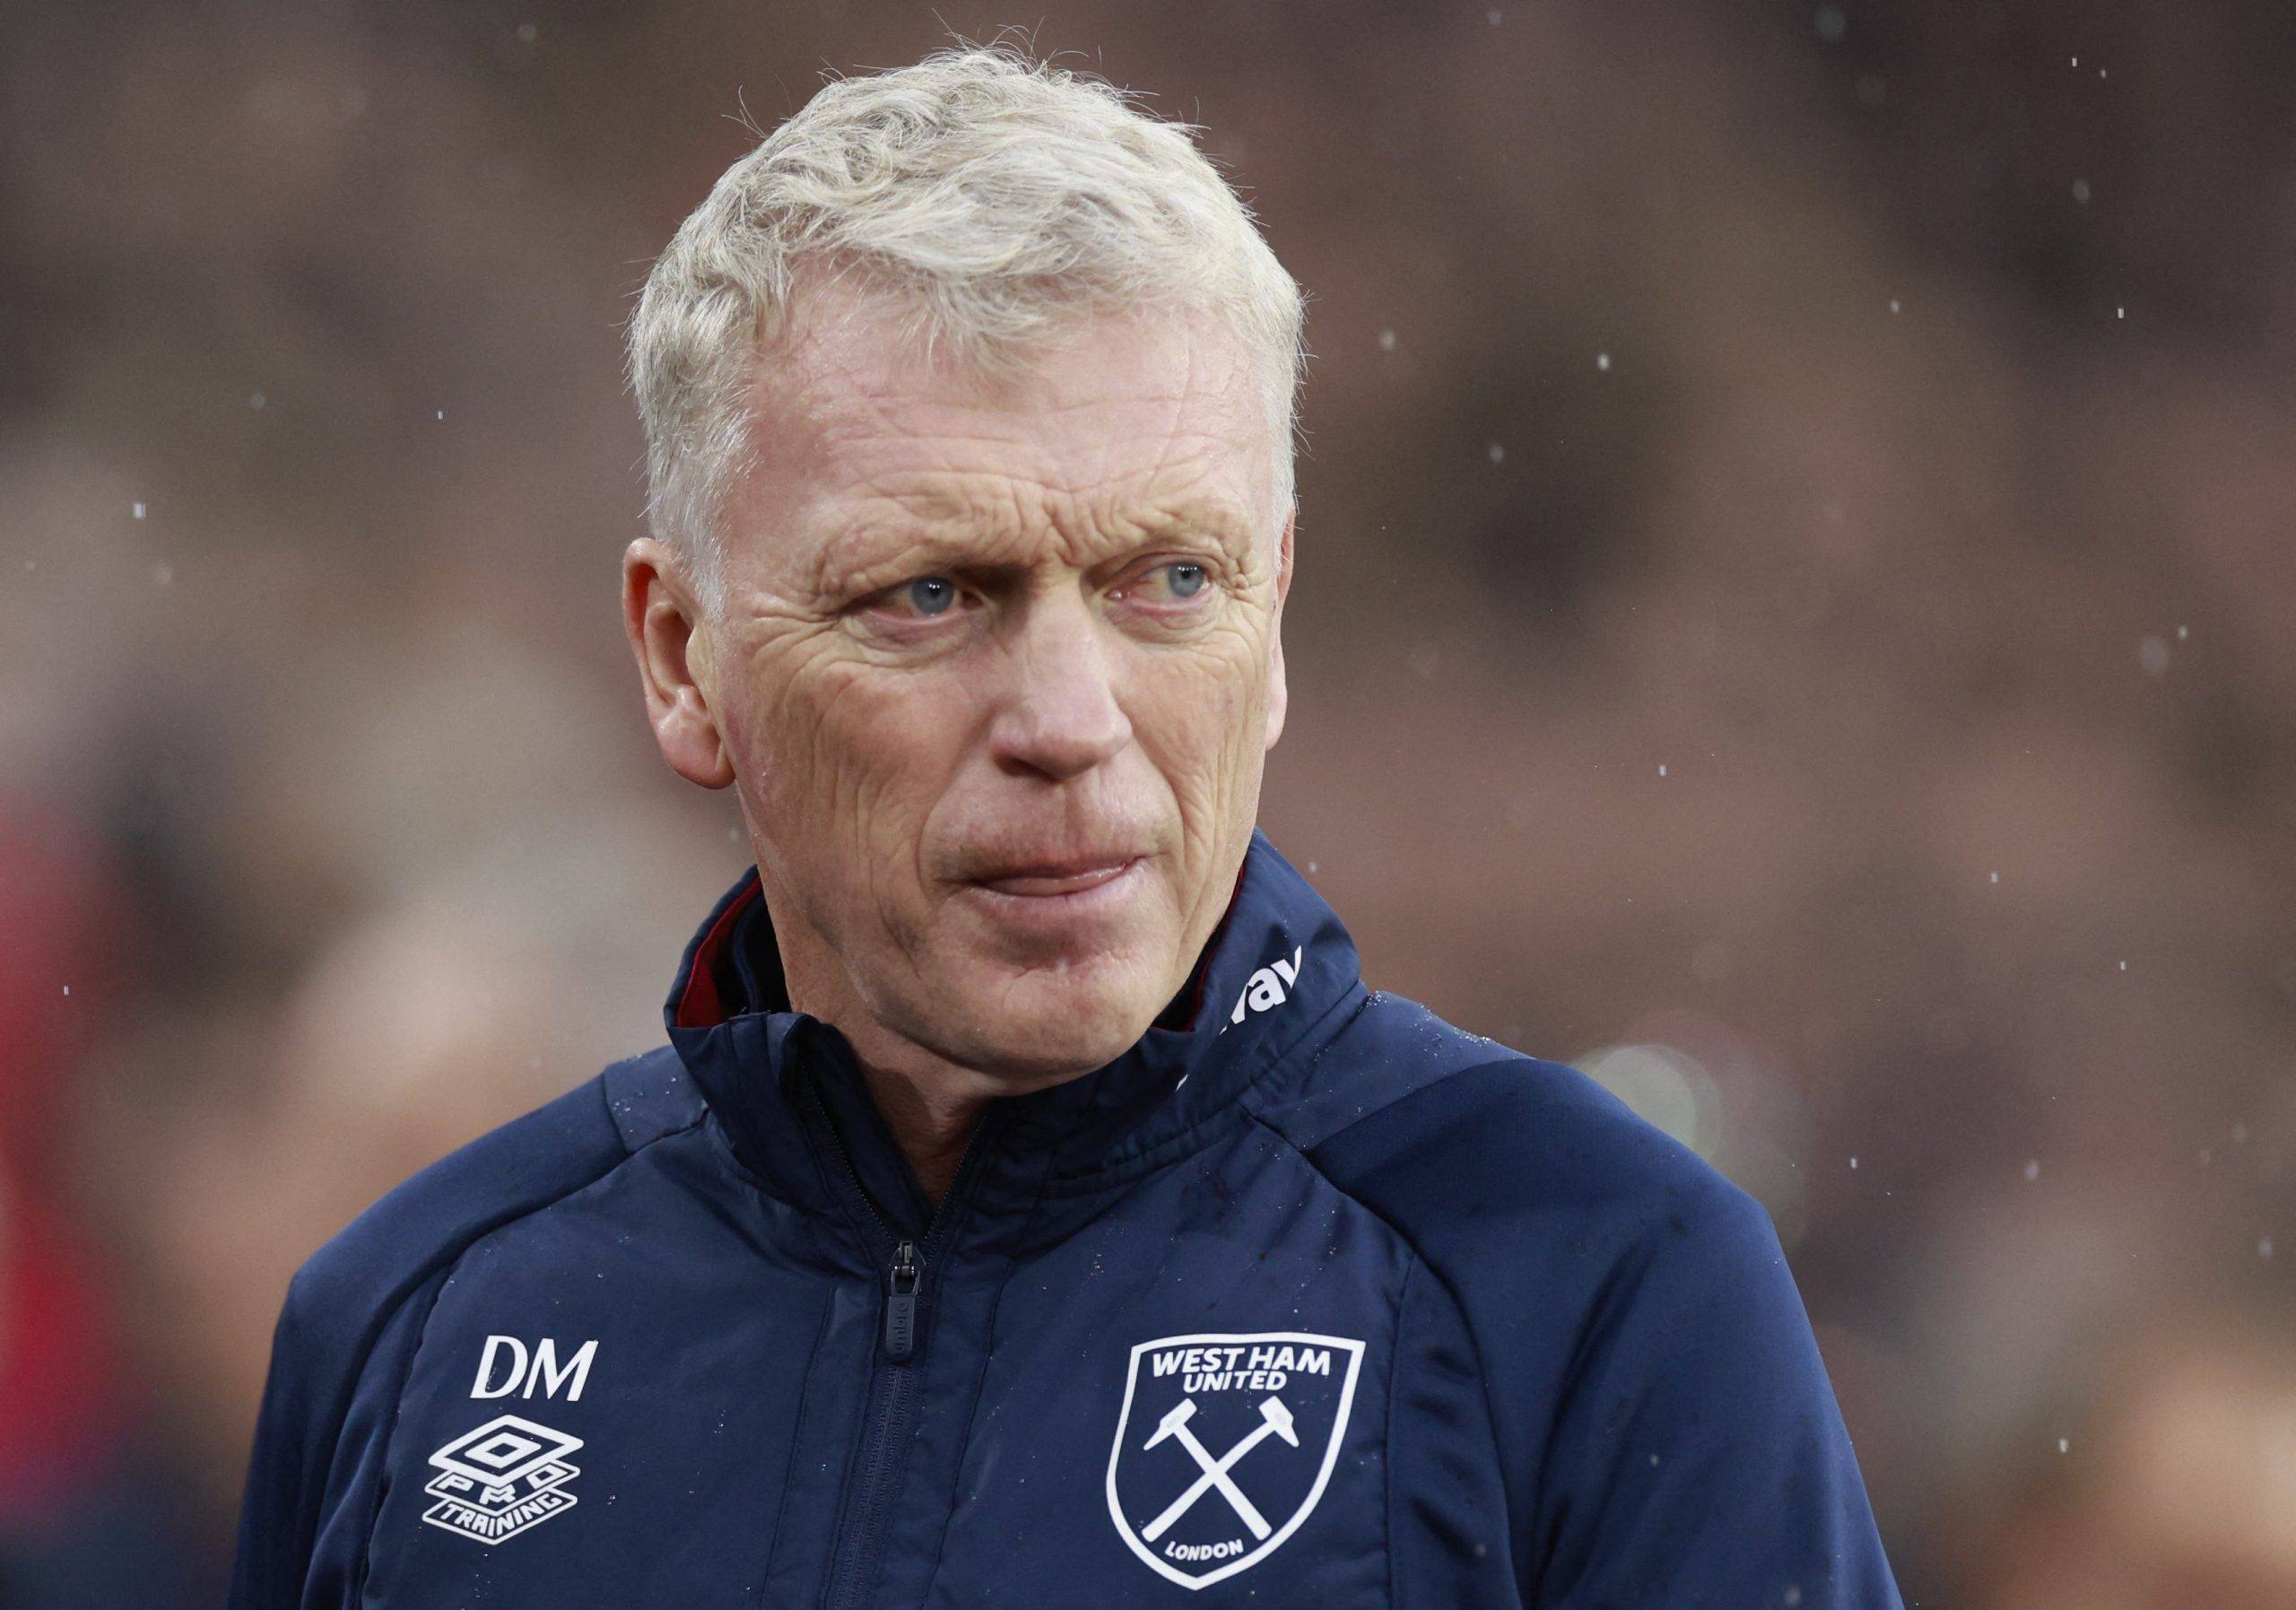 West Ham: Journalist confirms Hammers board are backing David Moyes - Podcasts